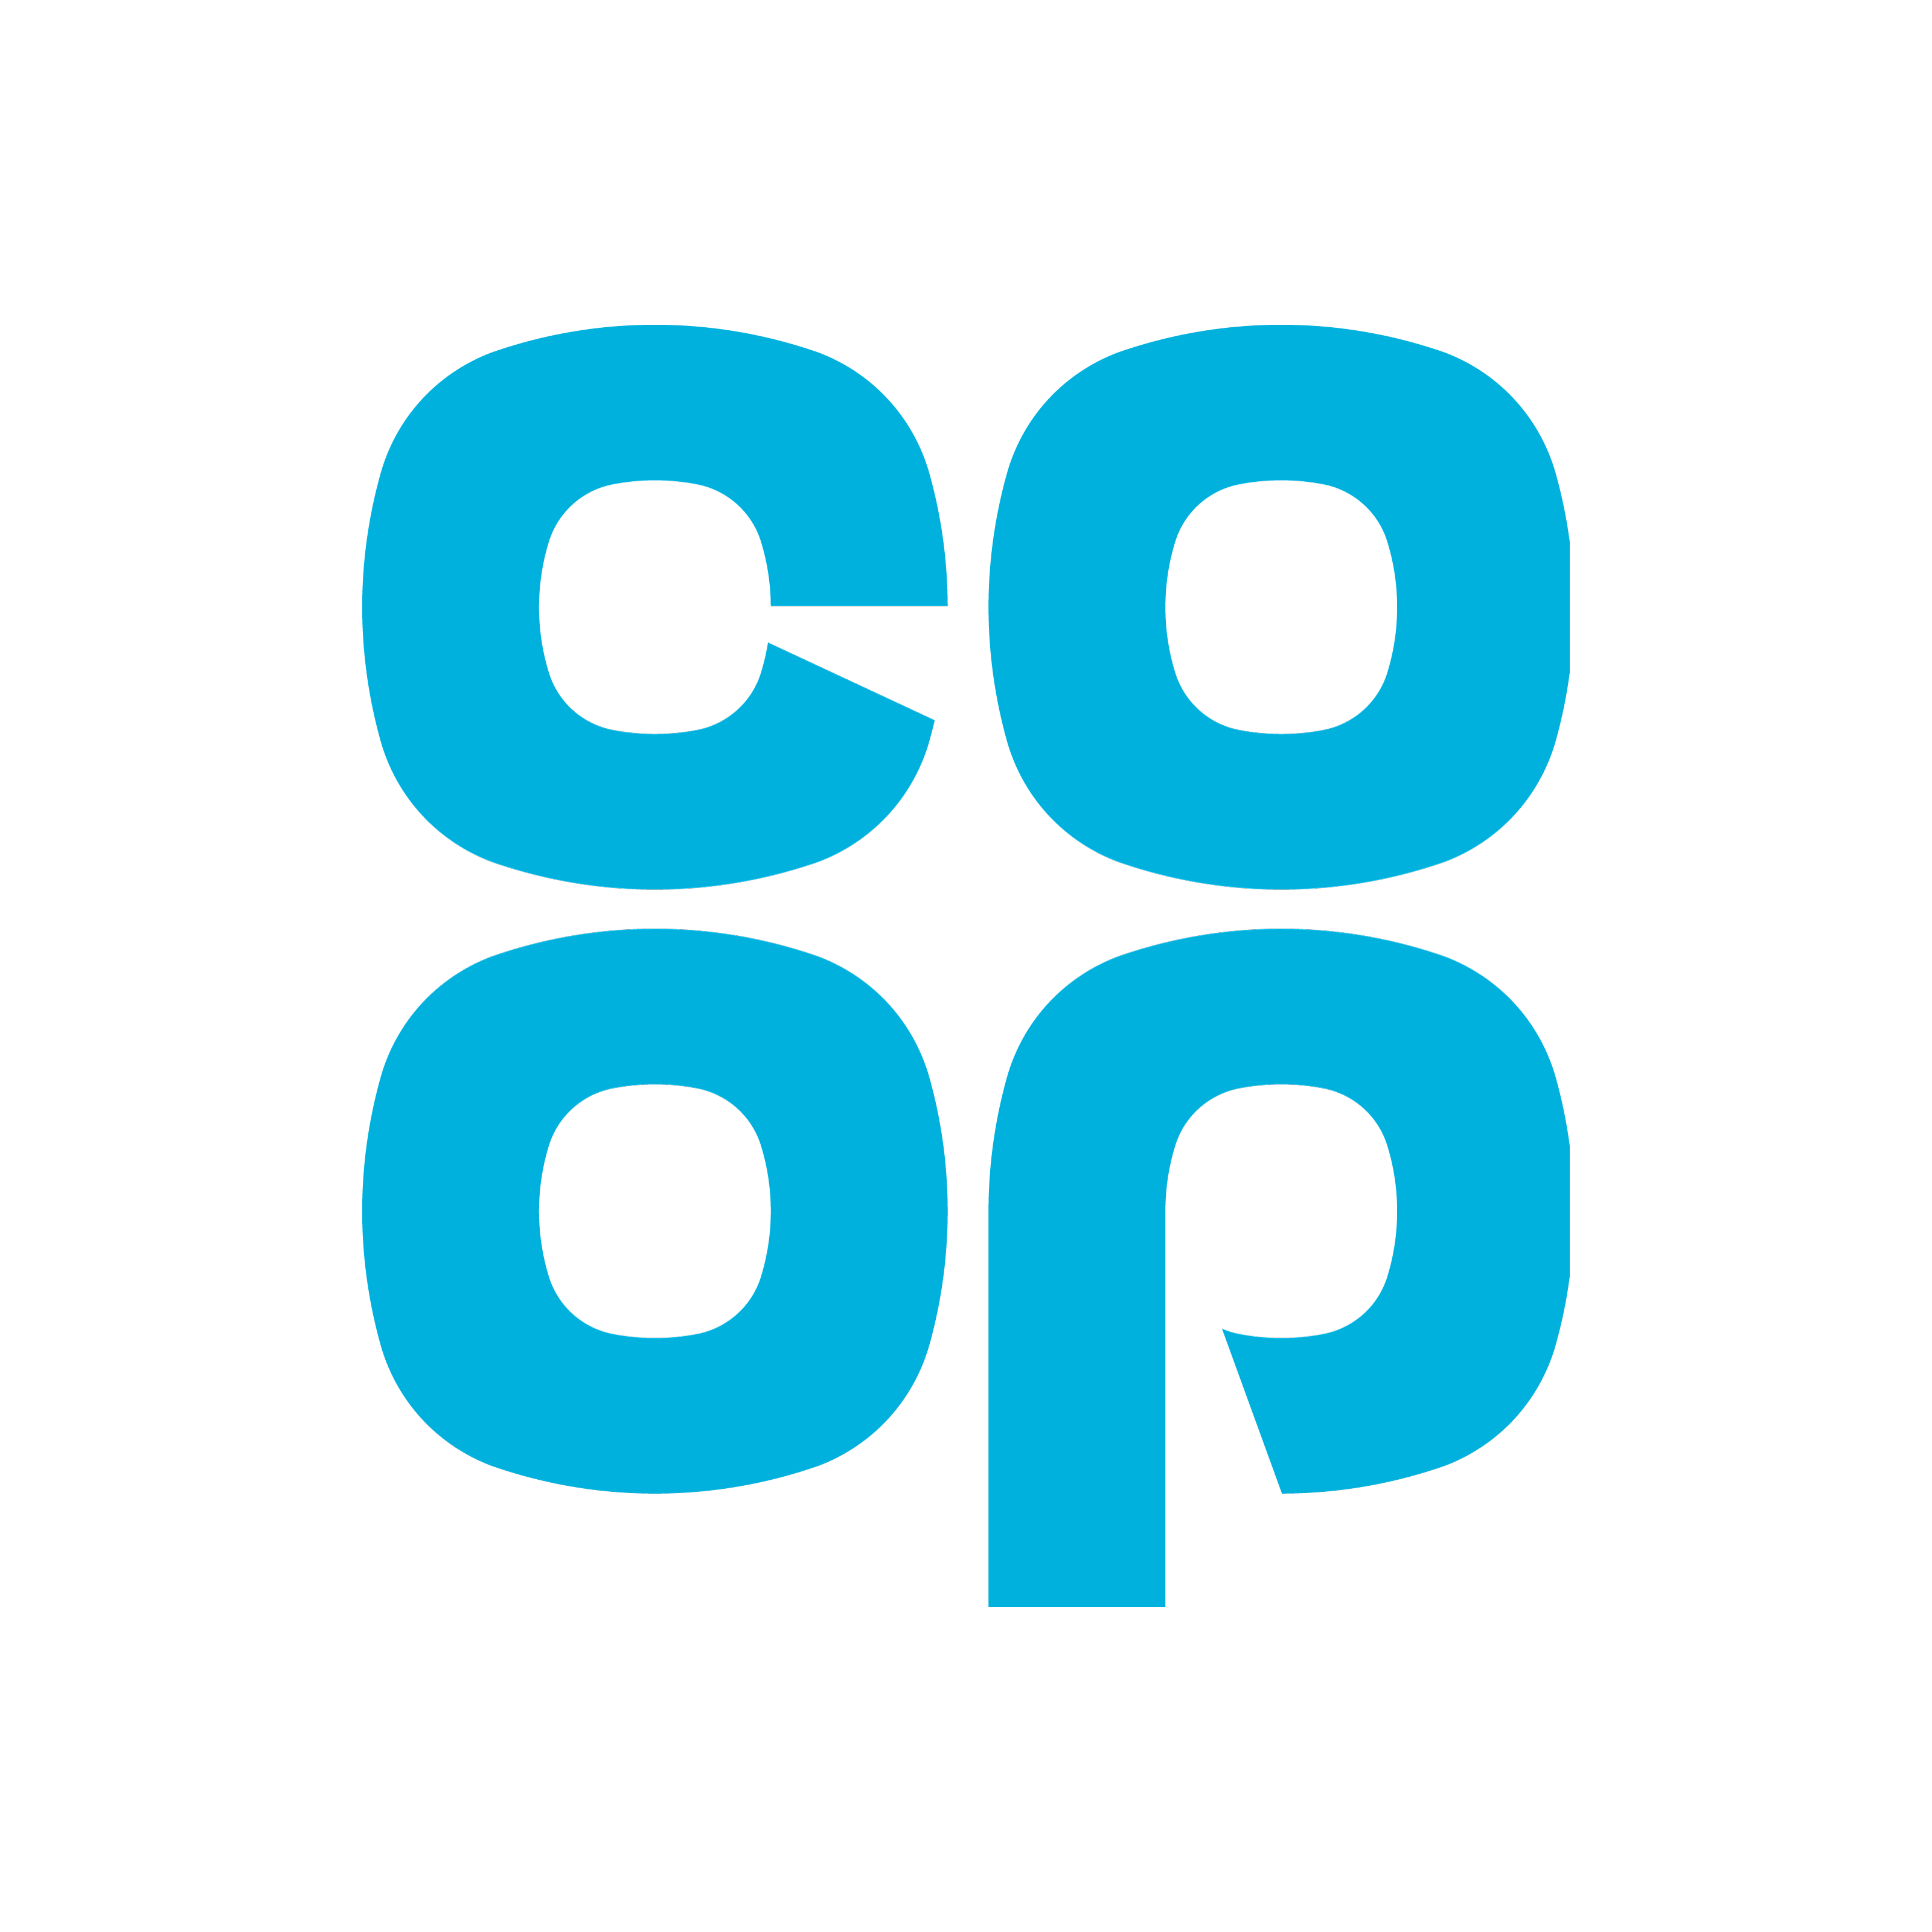 Cooperative Logo - The Co-operative Group | ThoughtWorks